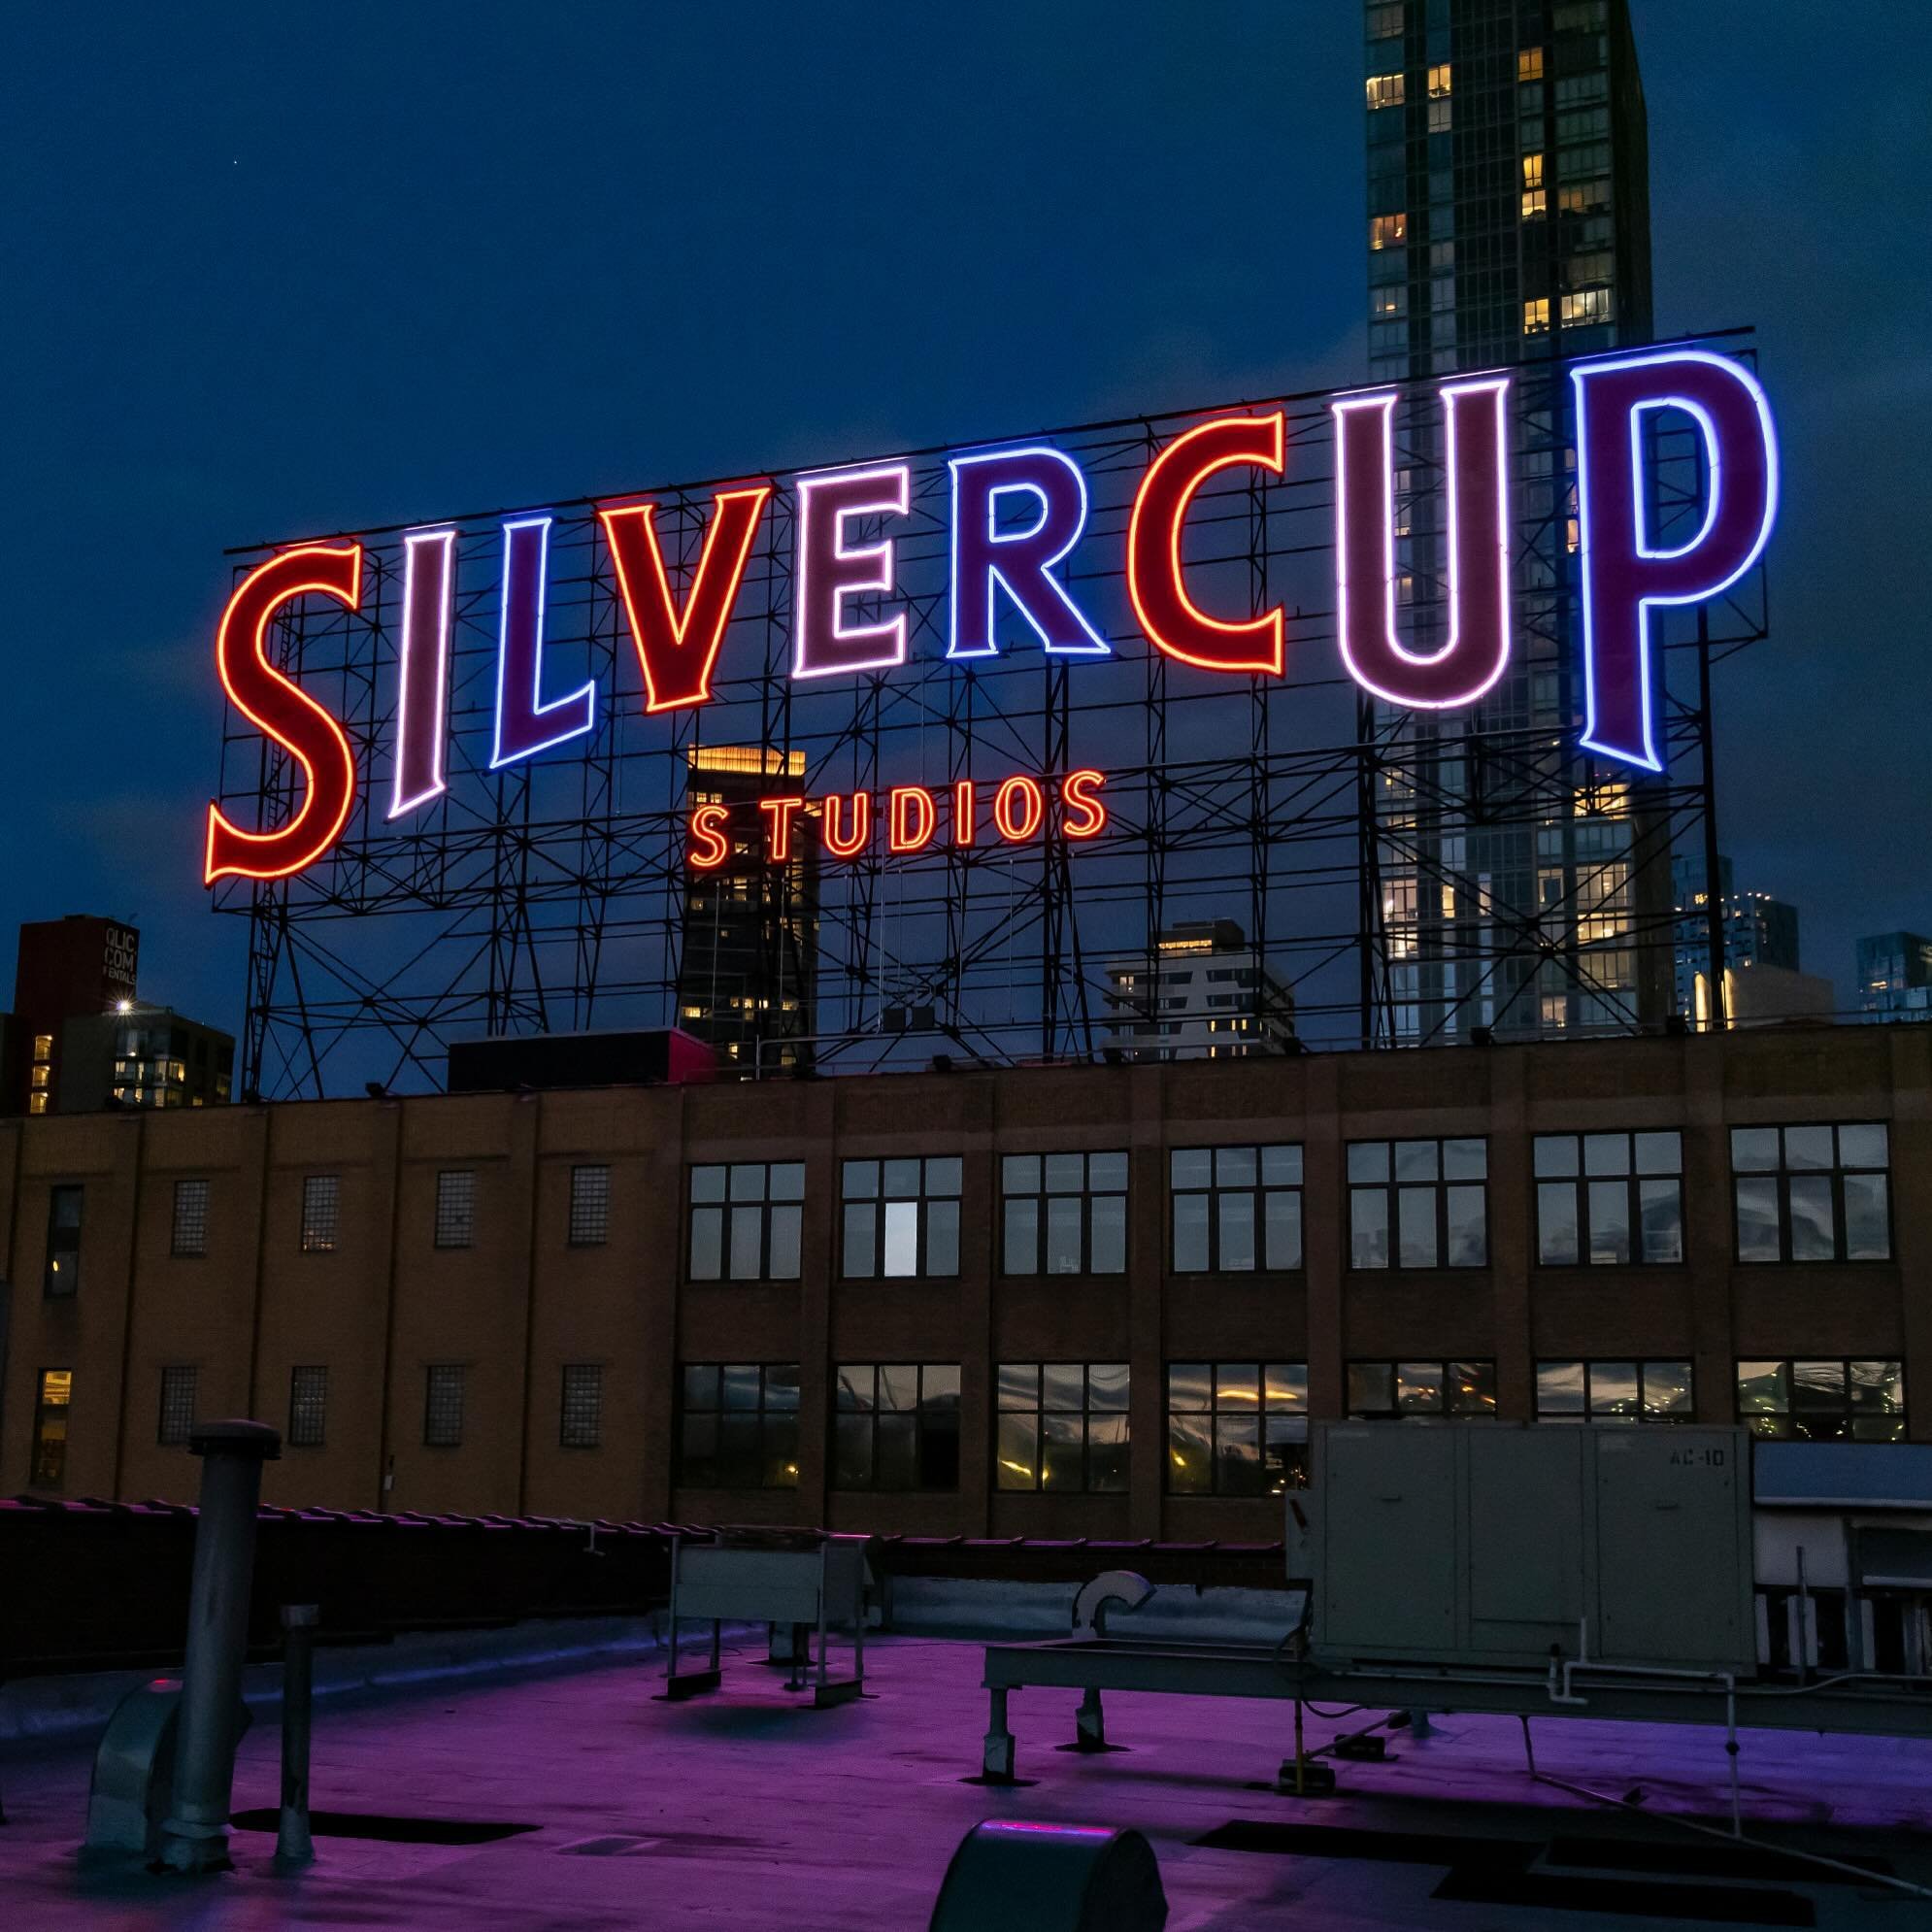 Today, our Silvercup Studios sign is proudly decked out in red, white, and blue to celebrate Memorial Day! 🌟 Let&rsquo;s honor those who served 🇺🇸 Saluting our heroes today and every day! 🌟

pic creds: @ajrphotos 

#MemorialDay #SilvercupStudios 